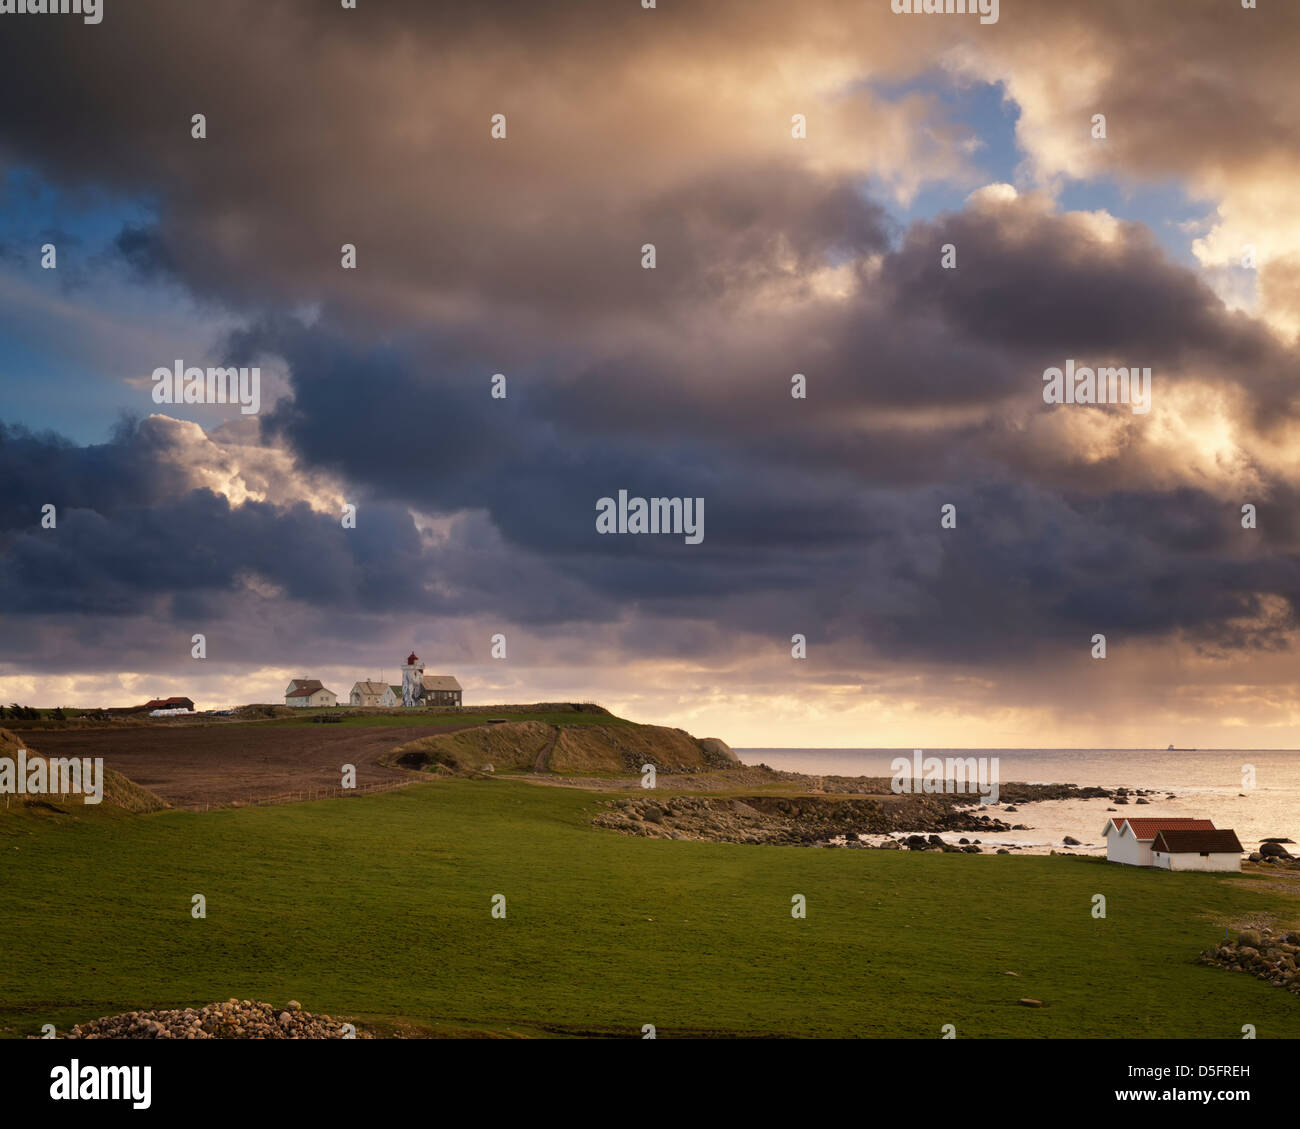 Clouds over Obrestrad fyr at the coast of Jæren, Norway. Stock Photo